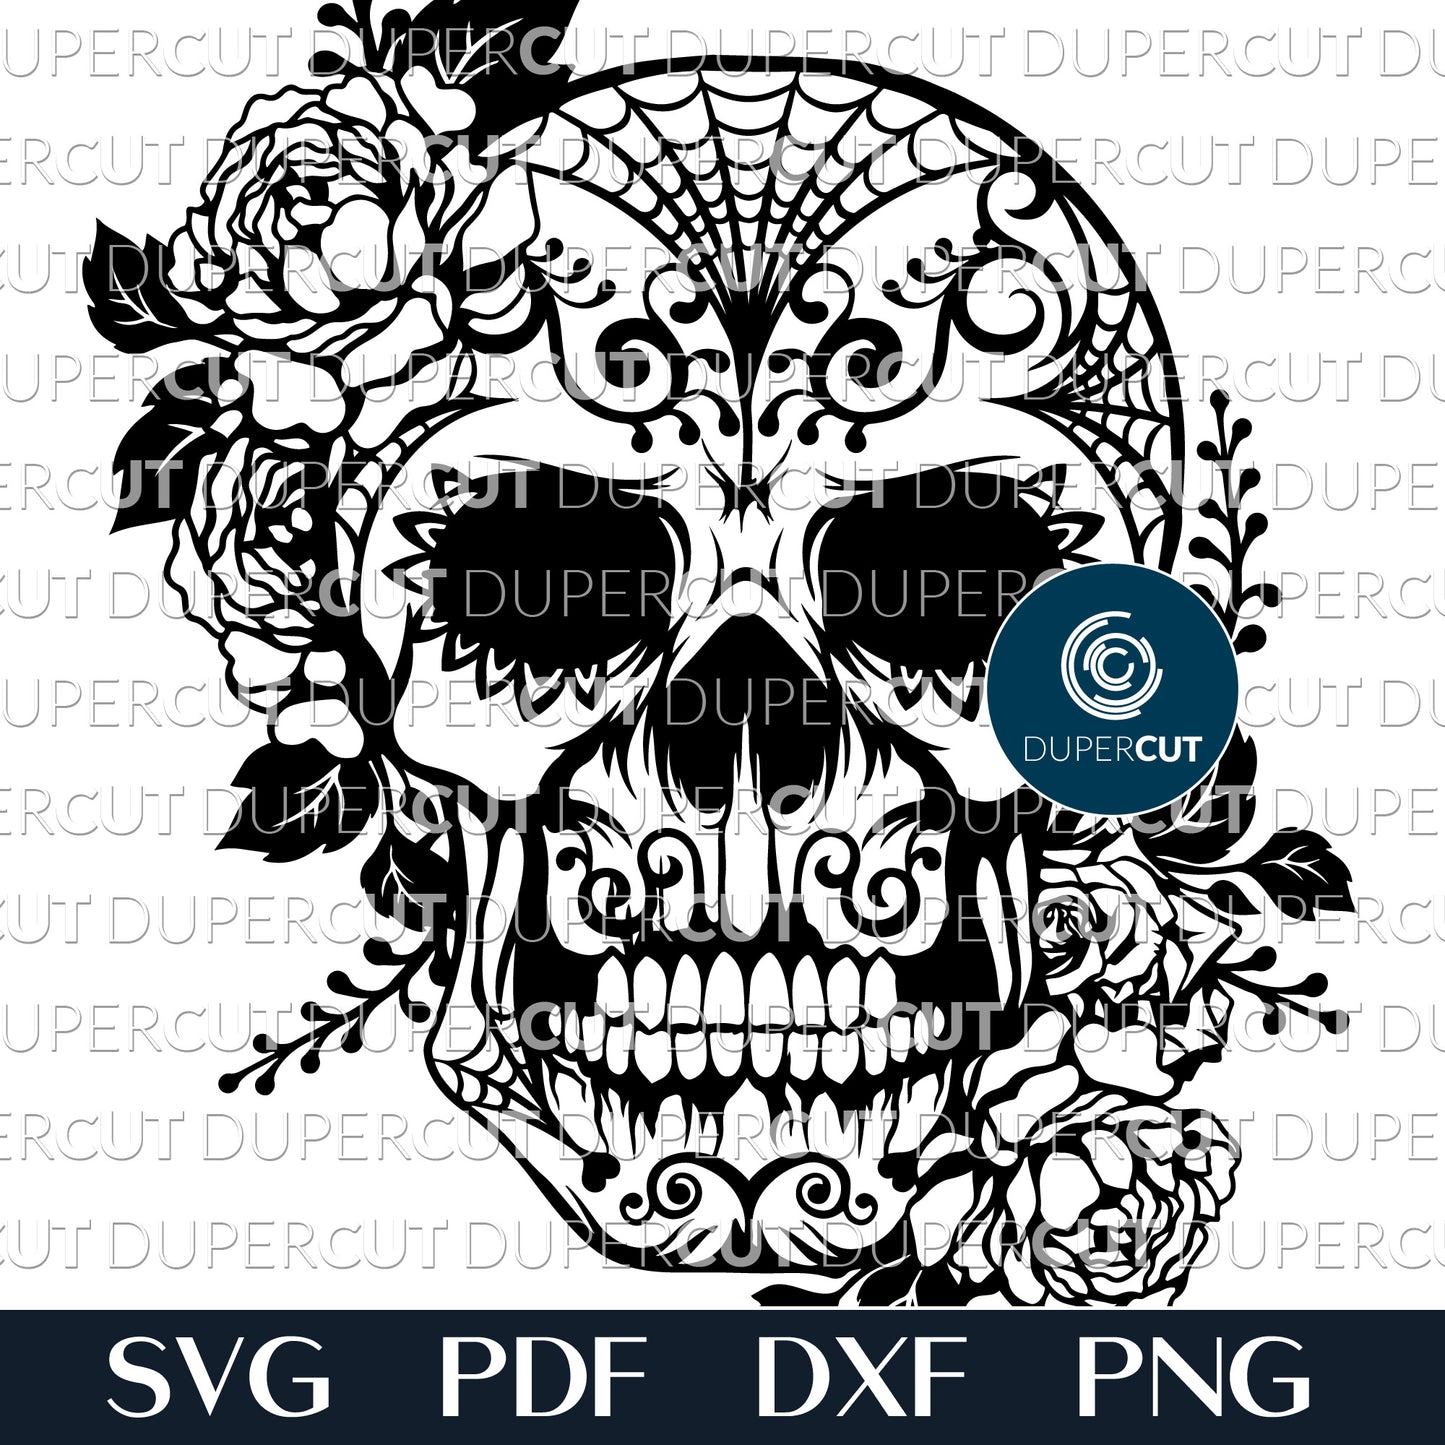 Gothic Sugar Skull - Day of the dead illustration - SVG DXF PNG laser cutting and engraving files for Cricut, Silhouette Cameo, Glowforge by DuperCut